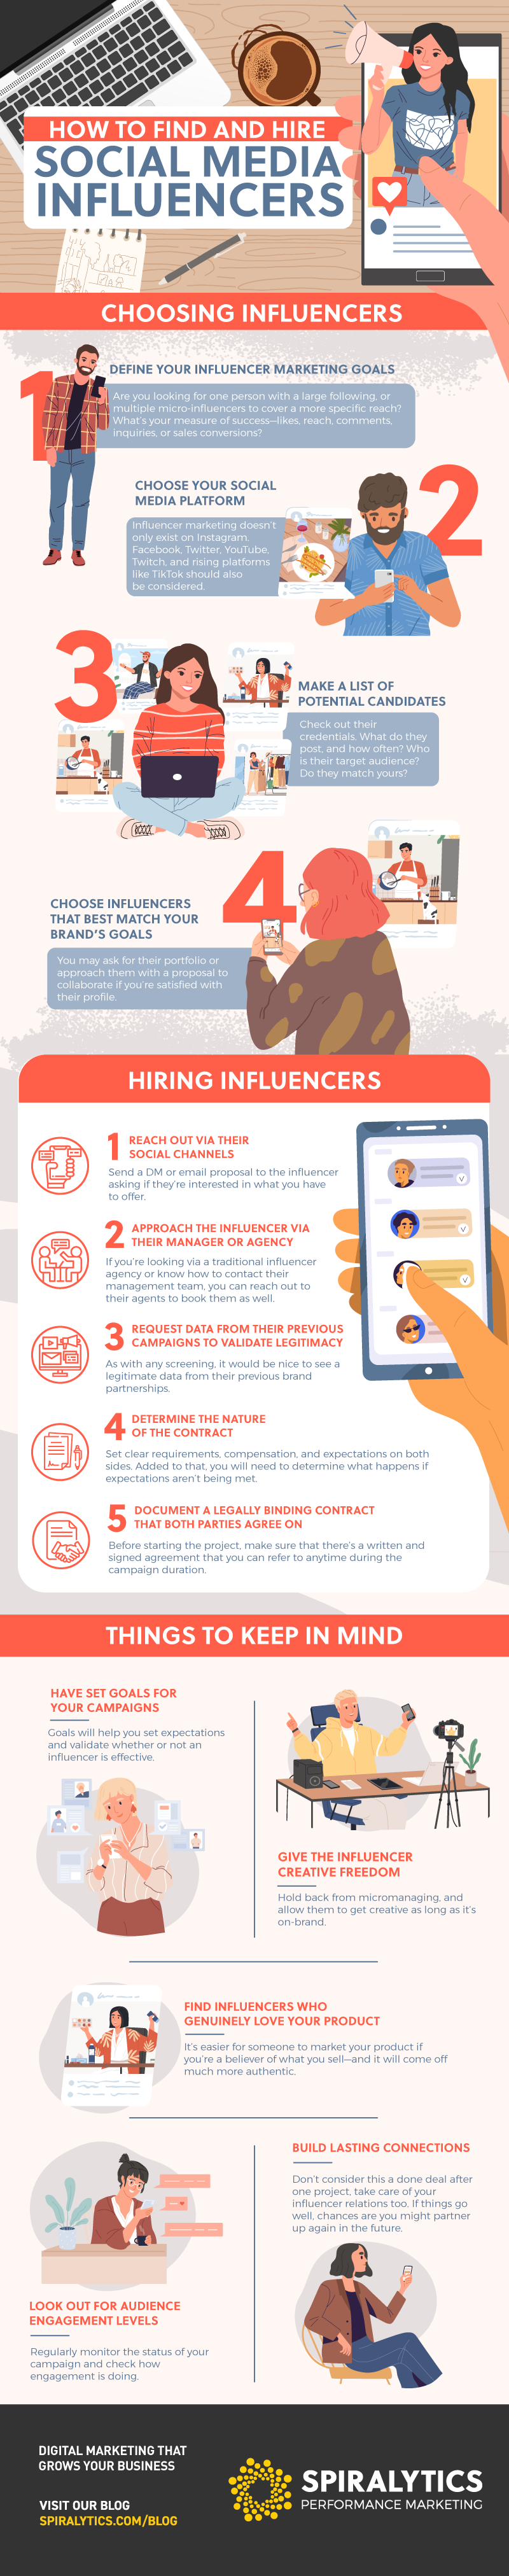 how to find and hire social media influencers infographic